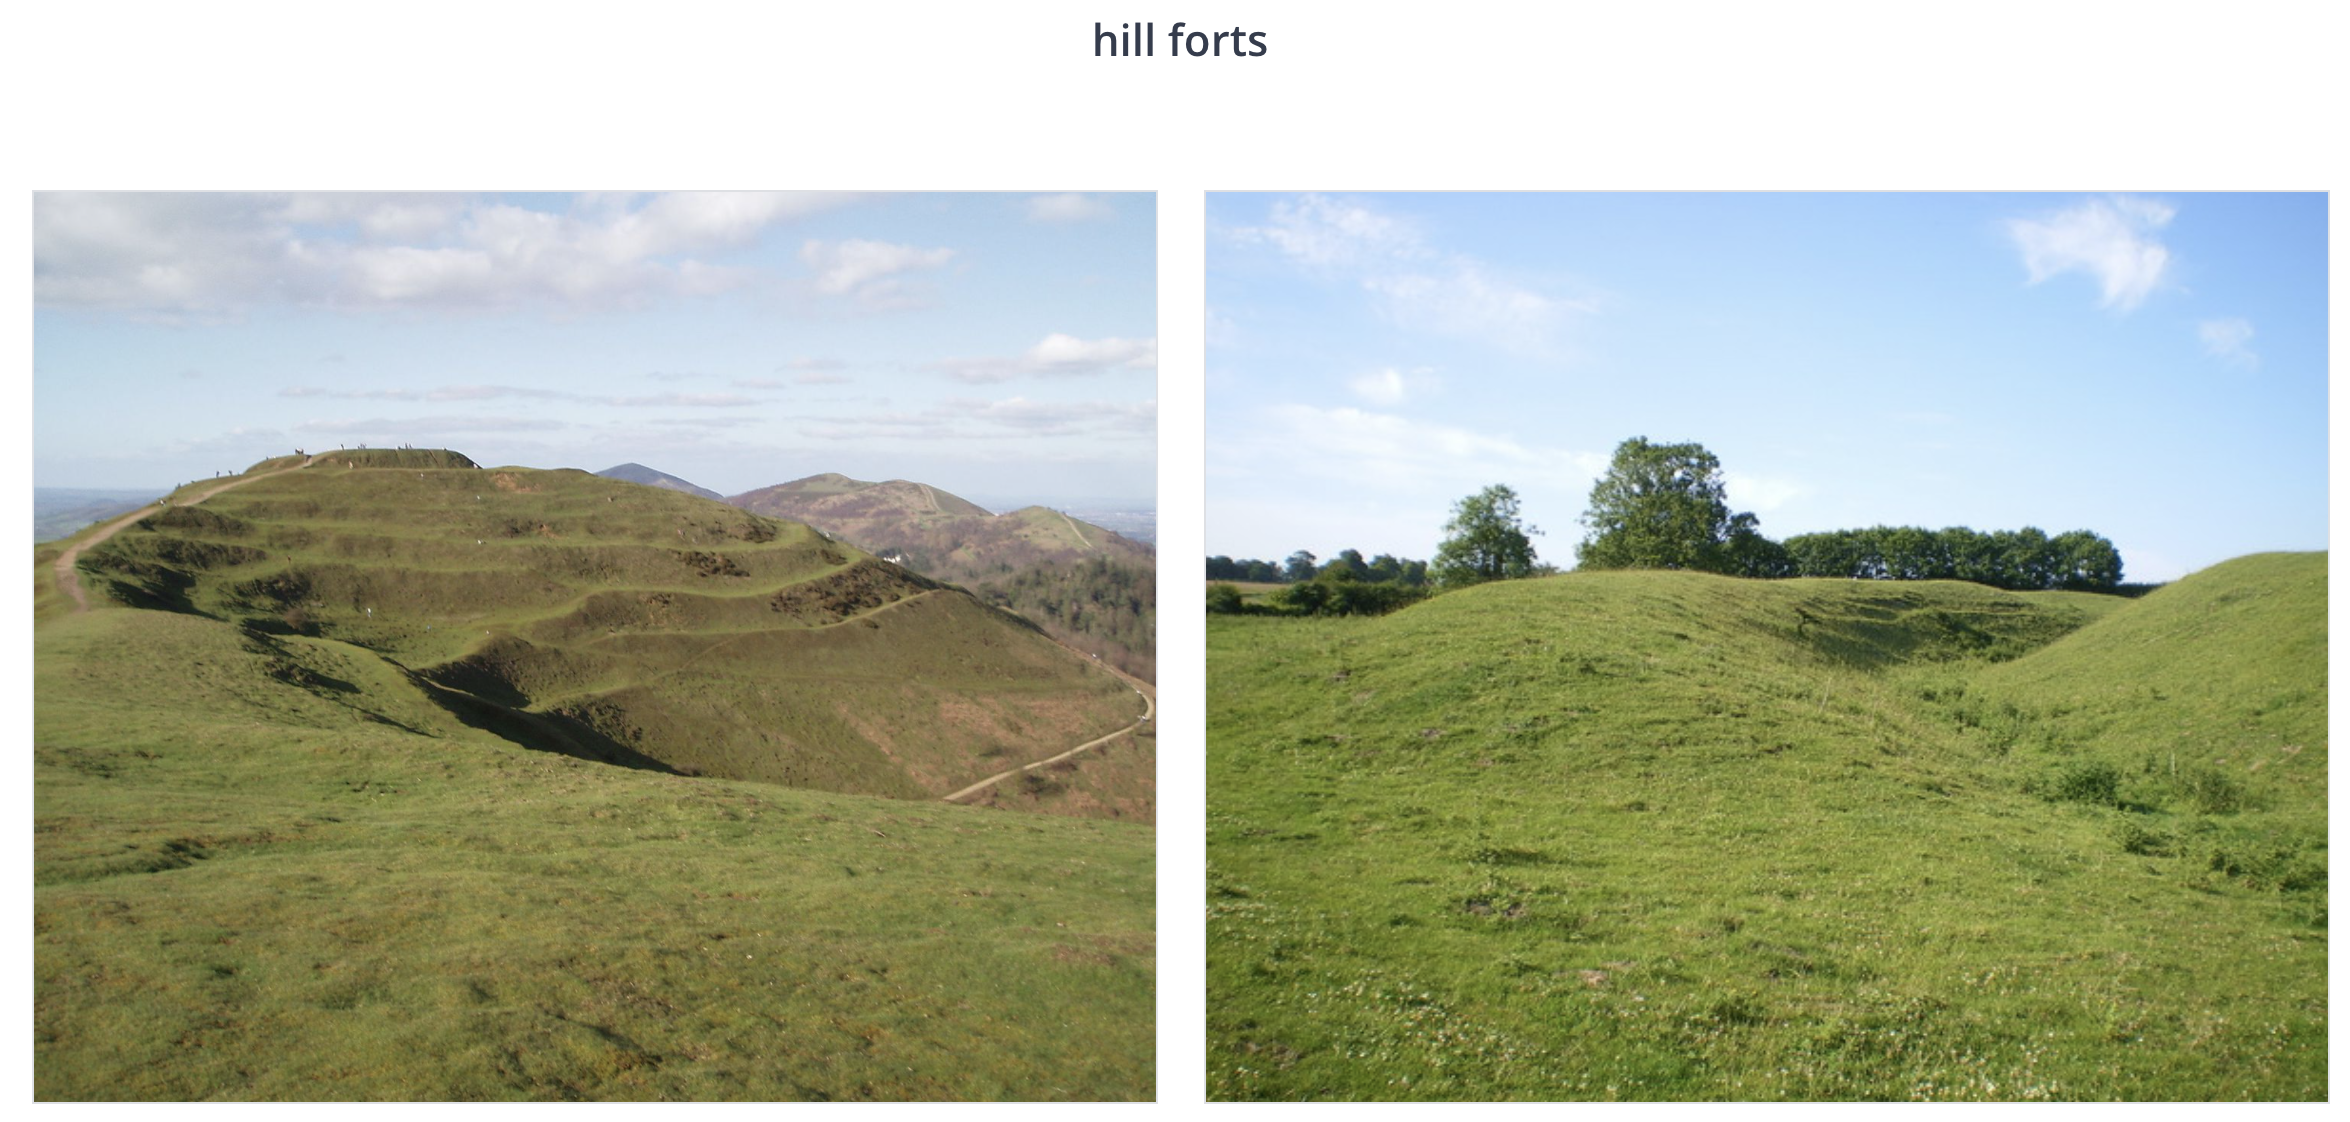 Hillforts